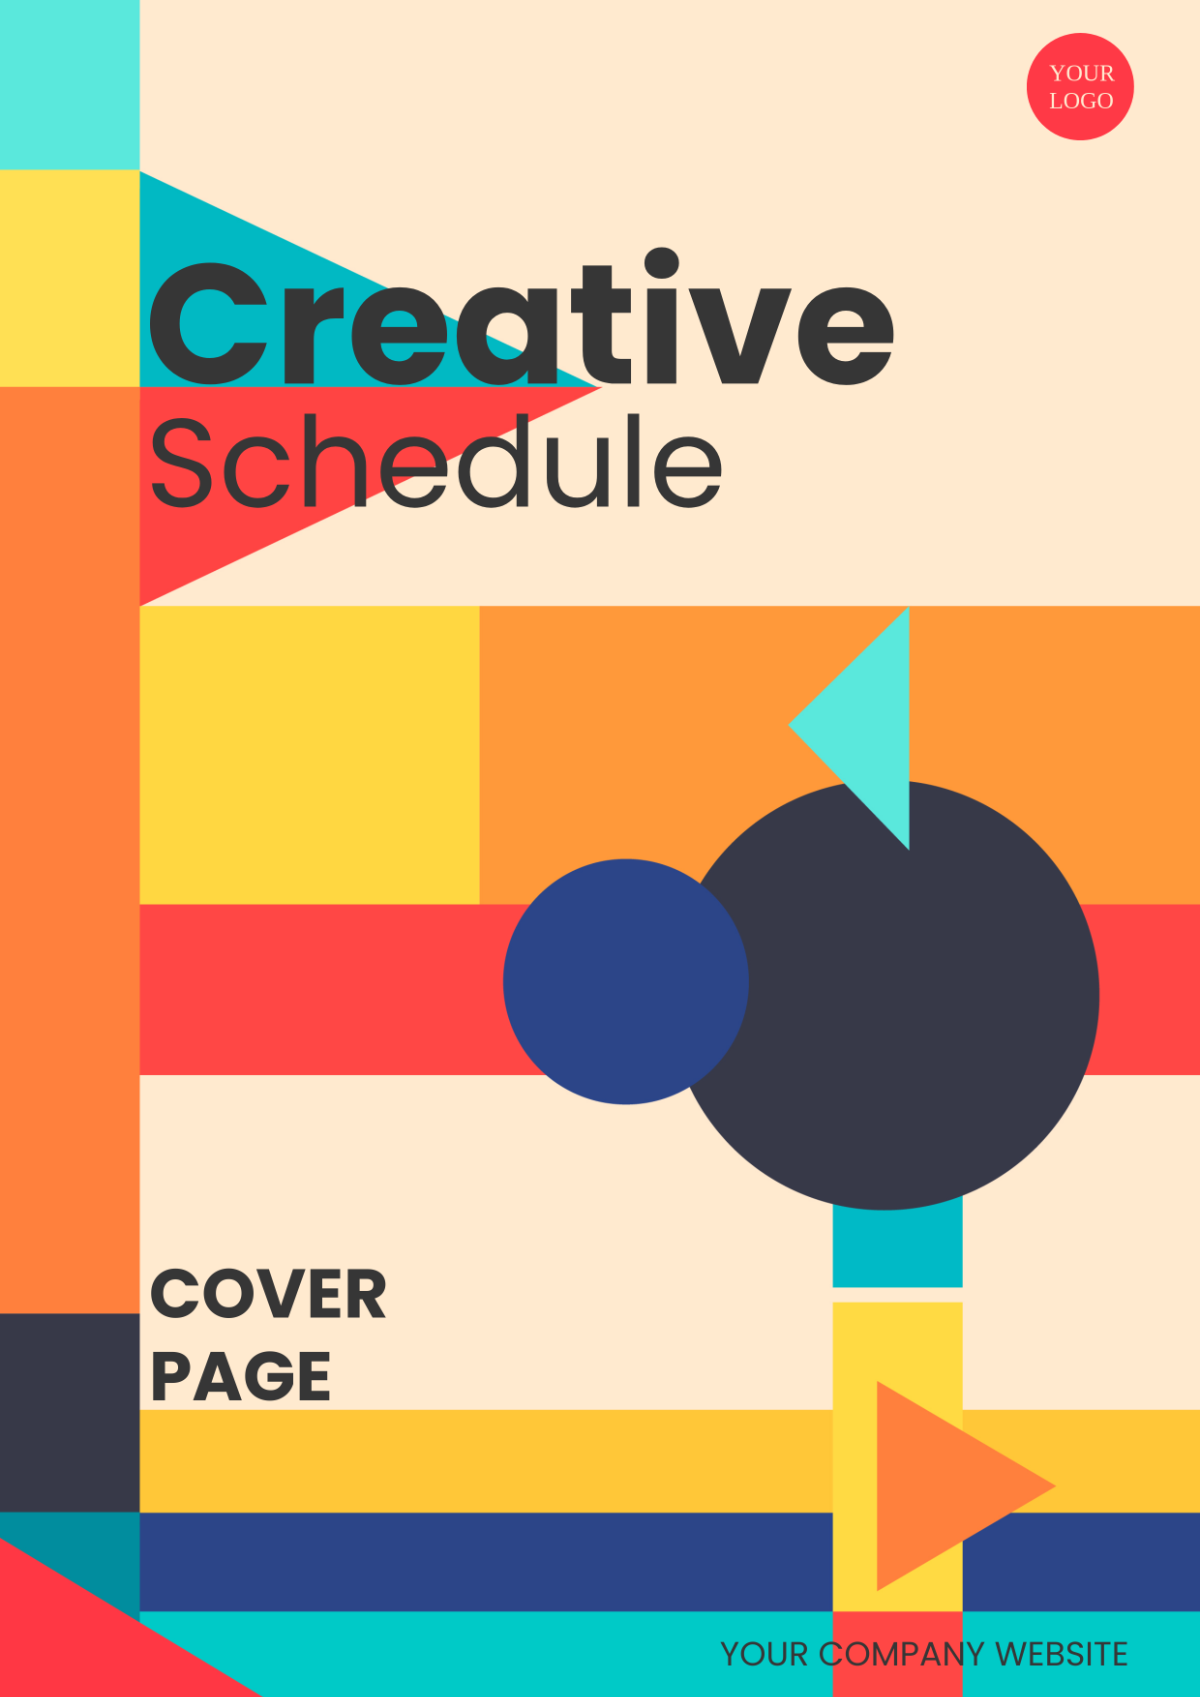 Creative Schedule Cover Page